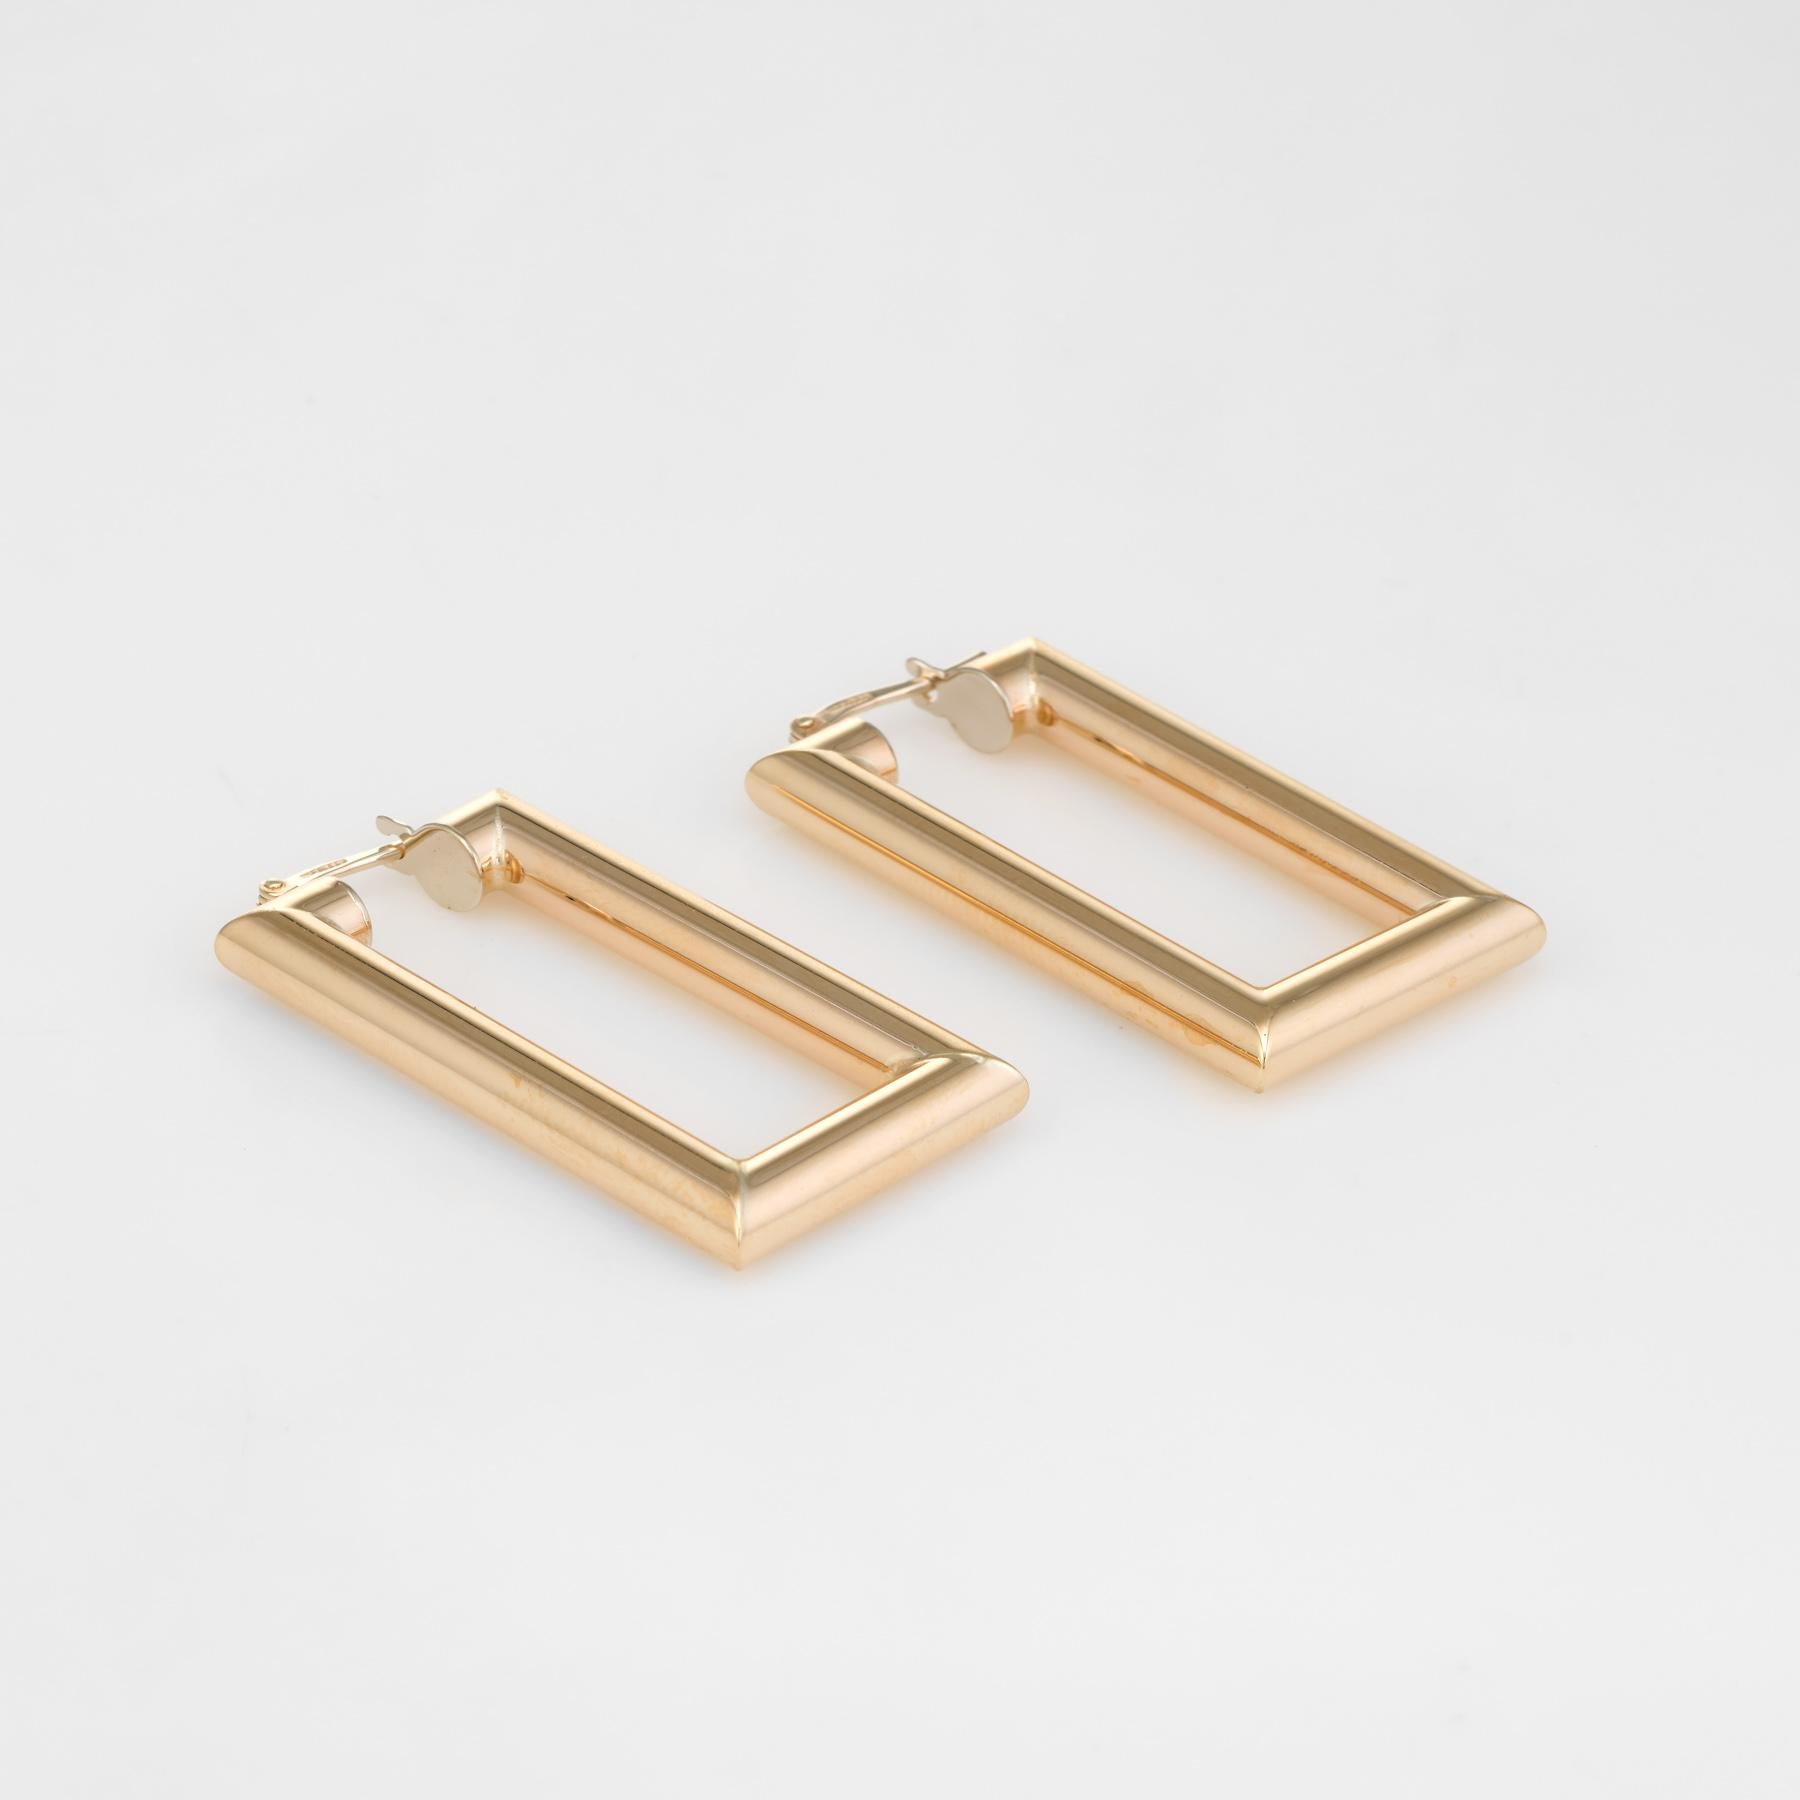 Elegant pair of square hoop earrings, crafted in 9k yellow gold. 

A surprising take on the more typical round hoop earrings, the square design makes a dramatic statement. The hollow tubular earrings have a nice lightweight feel (4.7 grams) yet sit